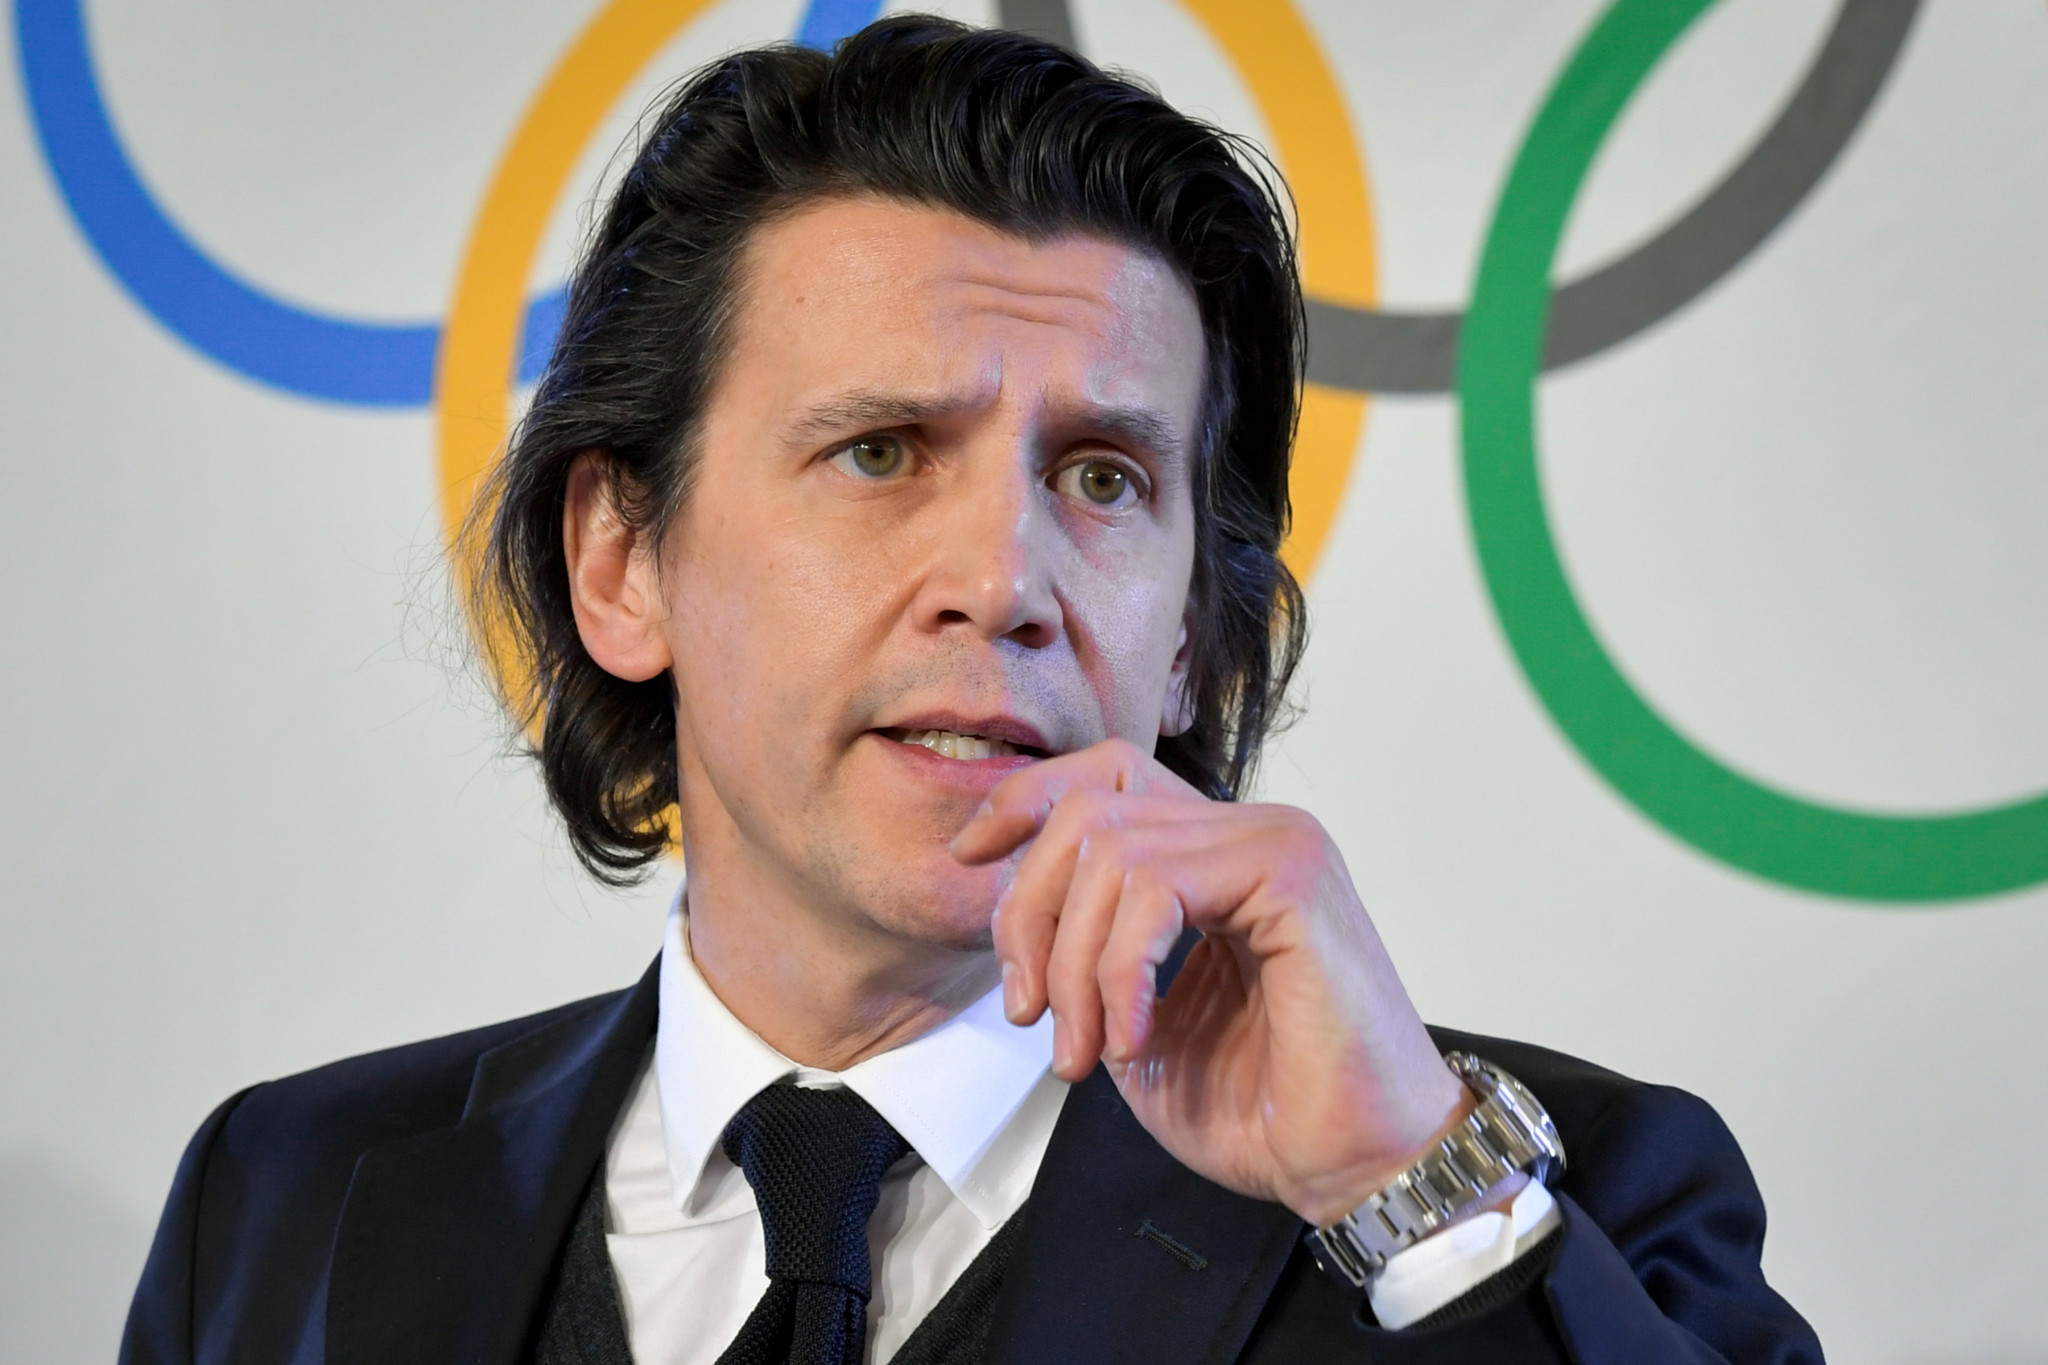 IOC executive director for the Olympic Games Christophe Dubi hailed Tokyo 2020's planning but that an ability to act quickly and effectively will be required at the Games ©Getty Images